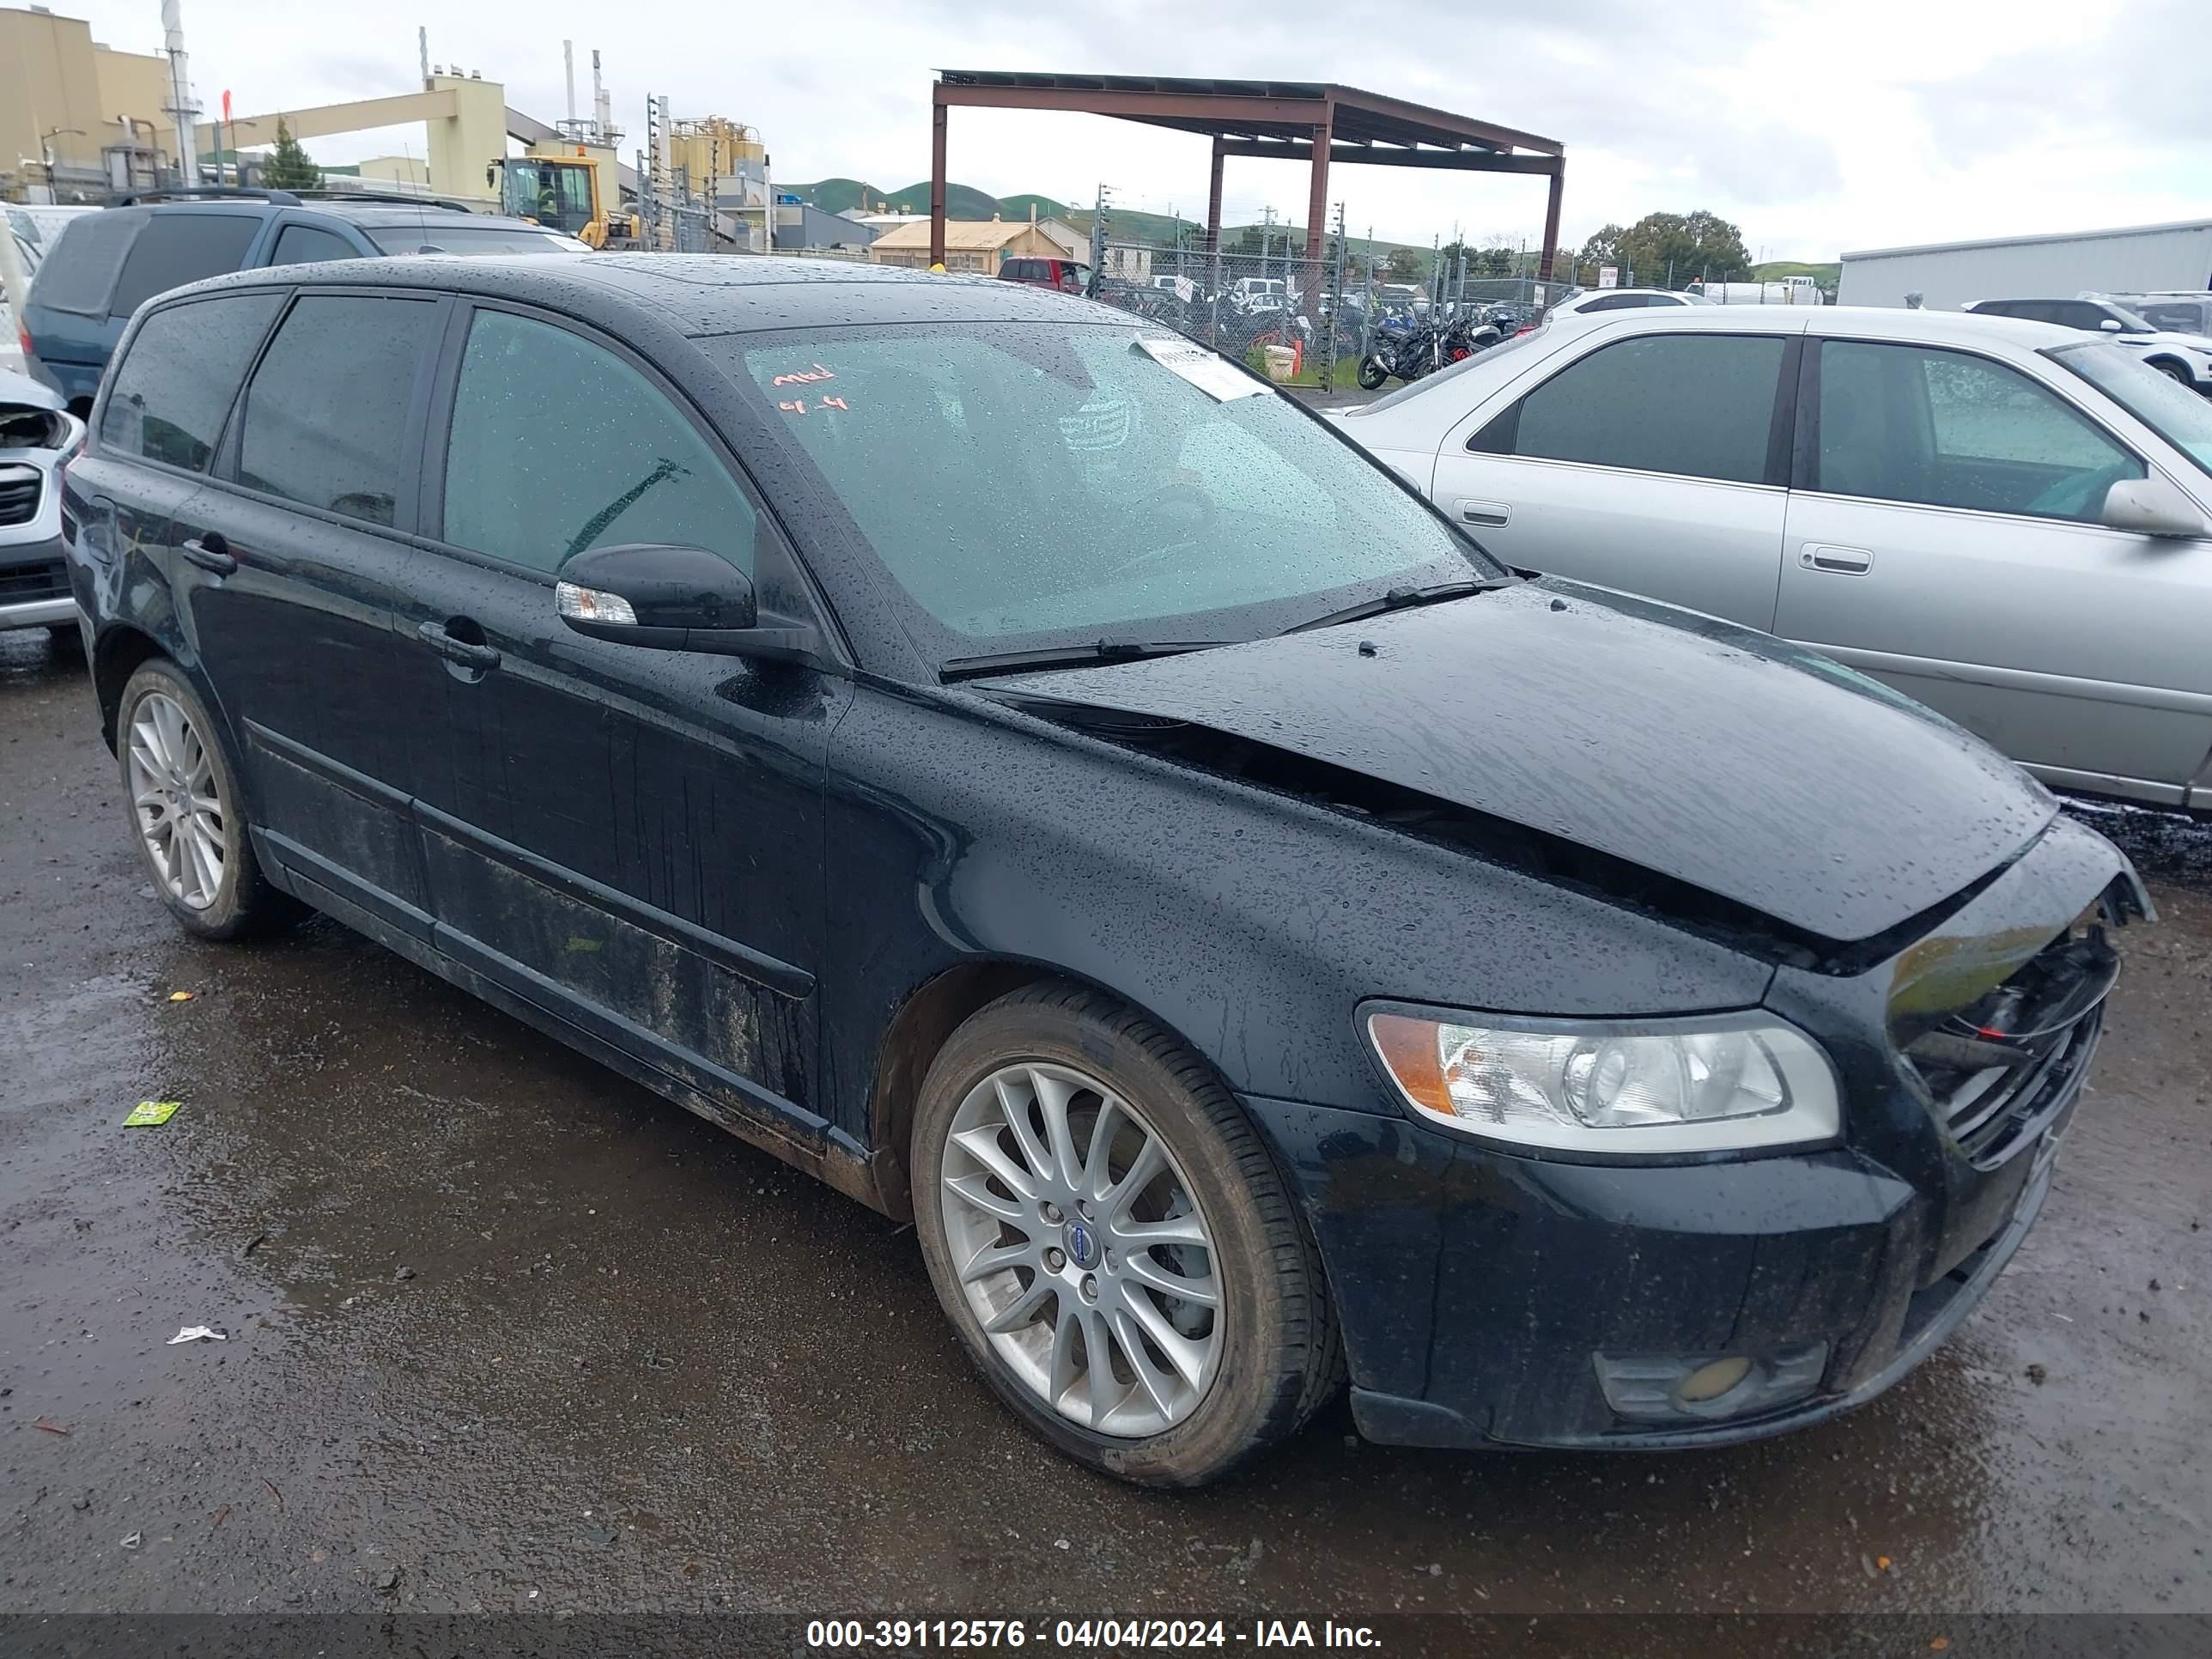 vin: YV1MW390292473155 YV1MW390292473155 2009 volvo v50 2400 for Sale in 94565, 2780 Willow Pass Road, Bay Point, California, USA